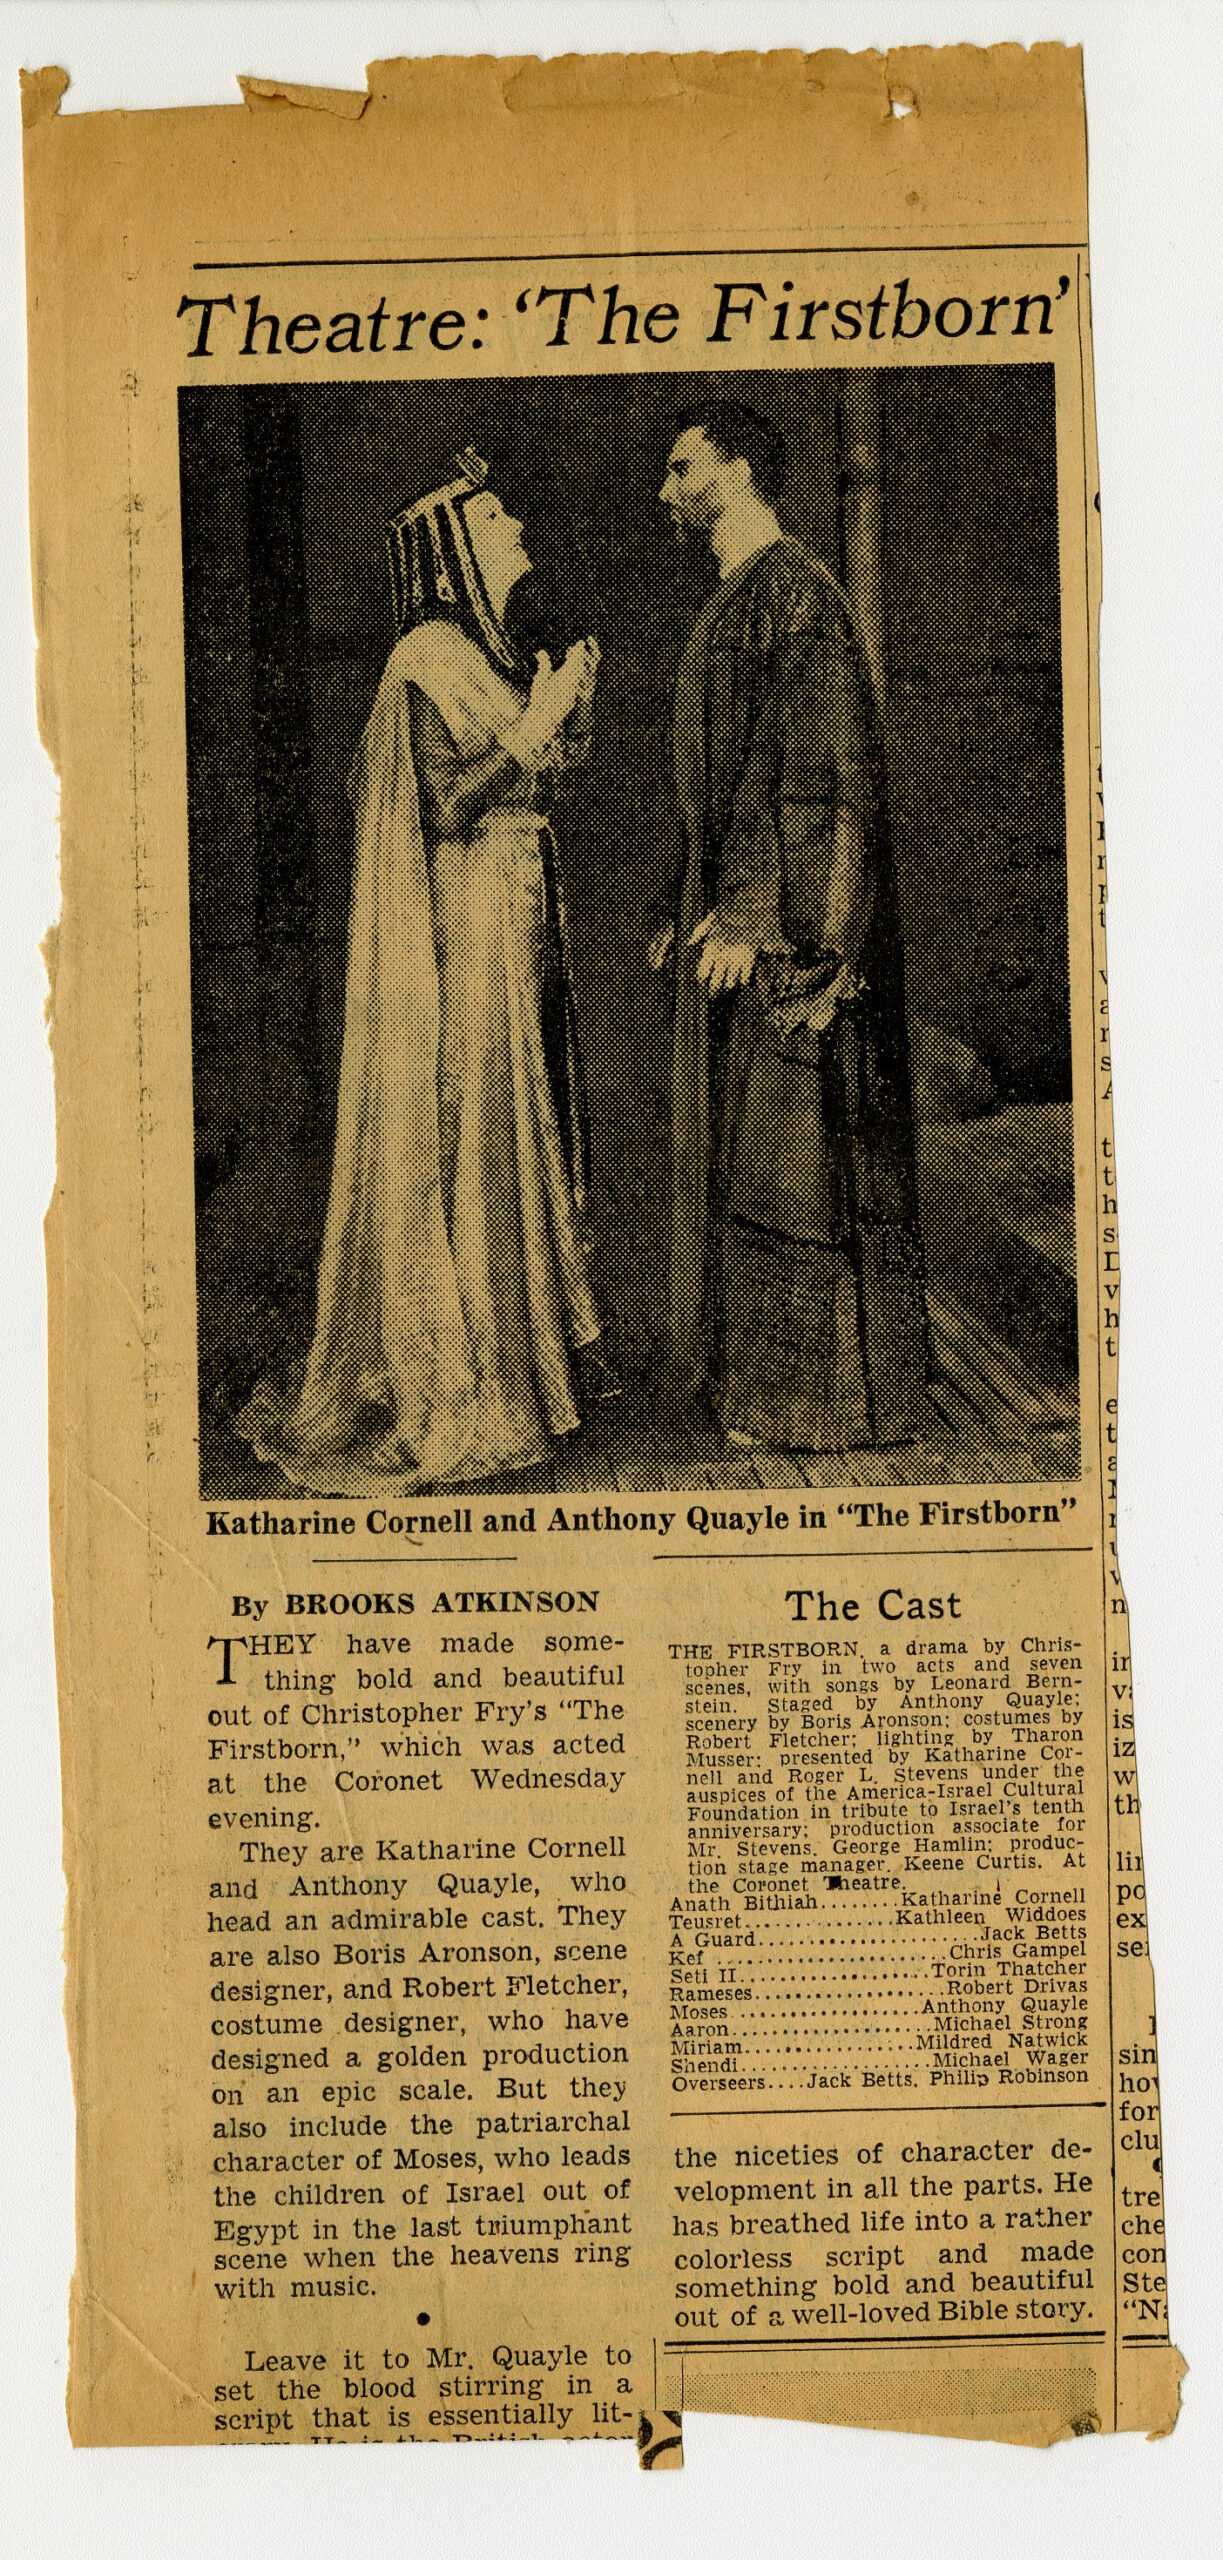 A newspaper clipping from The Firstborn, featuring commentary on the play and a cast photograph.